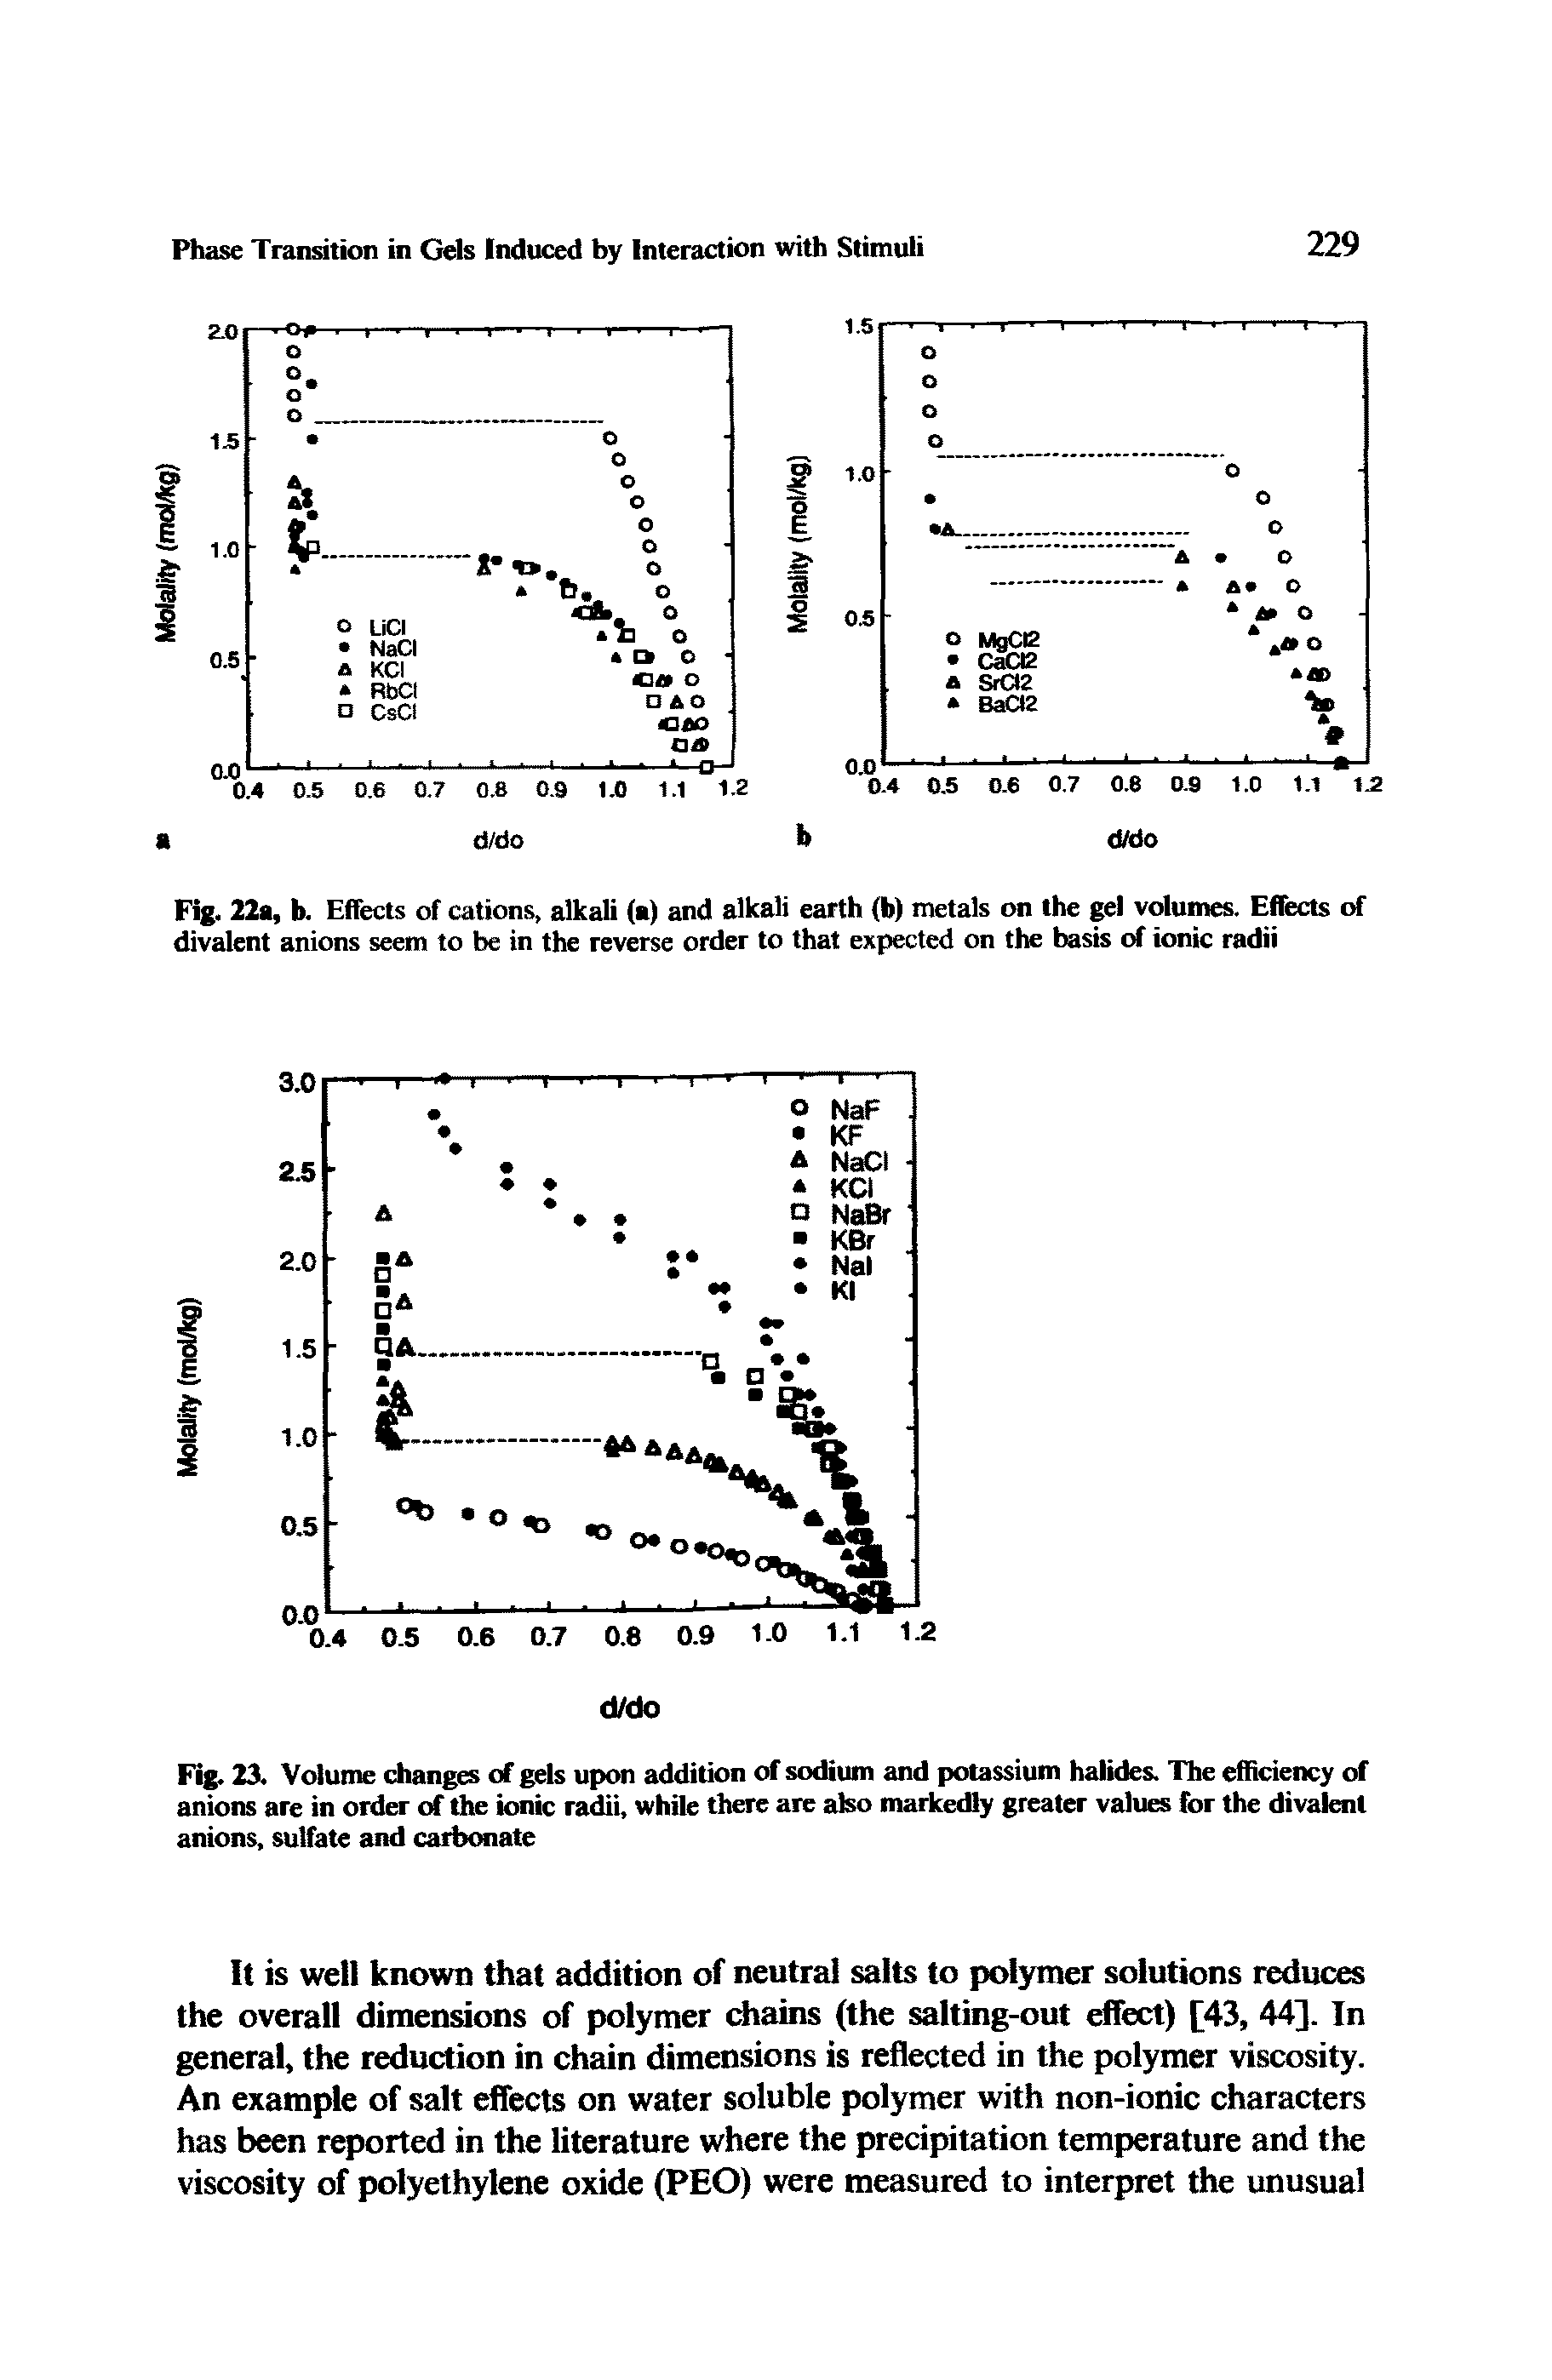 Fig. 23. Volume changes of gels upon addition of sodium and potassium halides. The efficiency of anions are in order of the ionic radii, while there are also markedly greater values for the divalent anions, sulfate and carbonate...